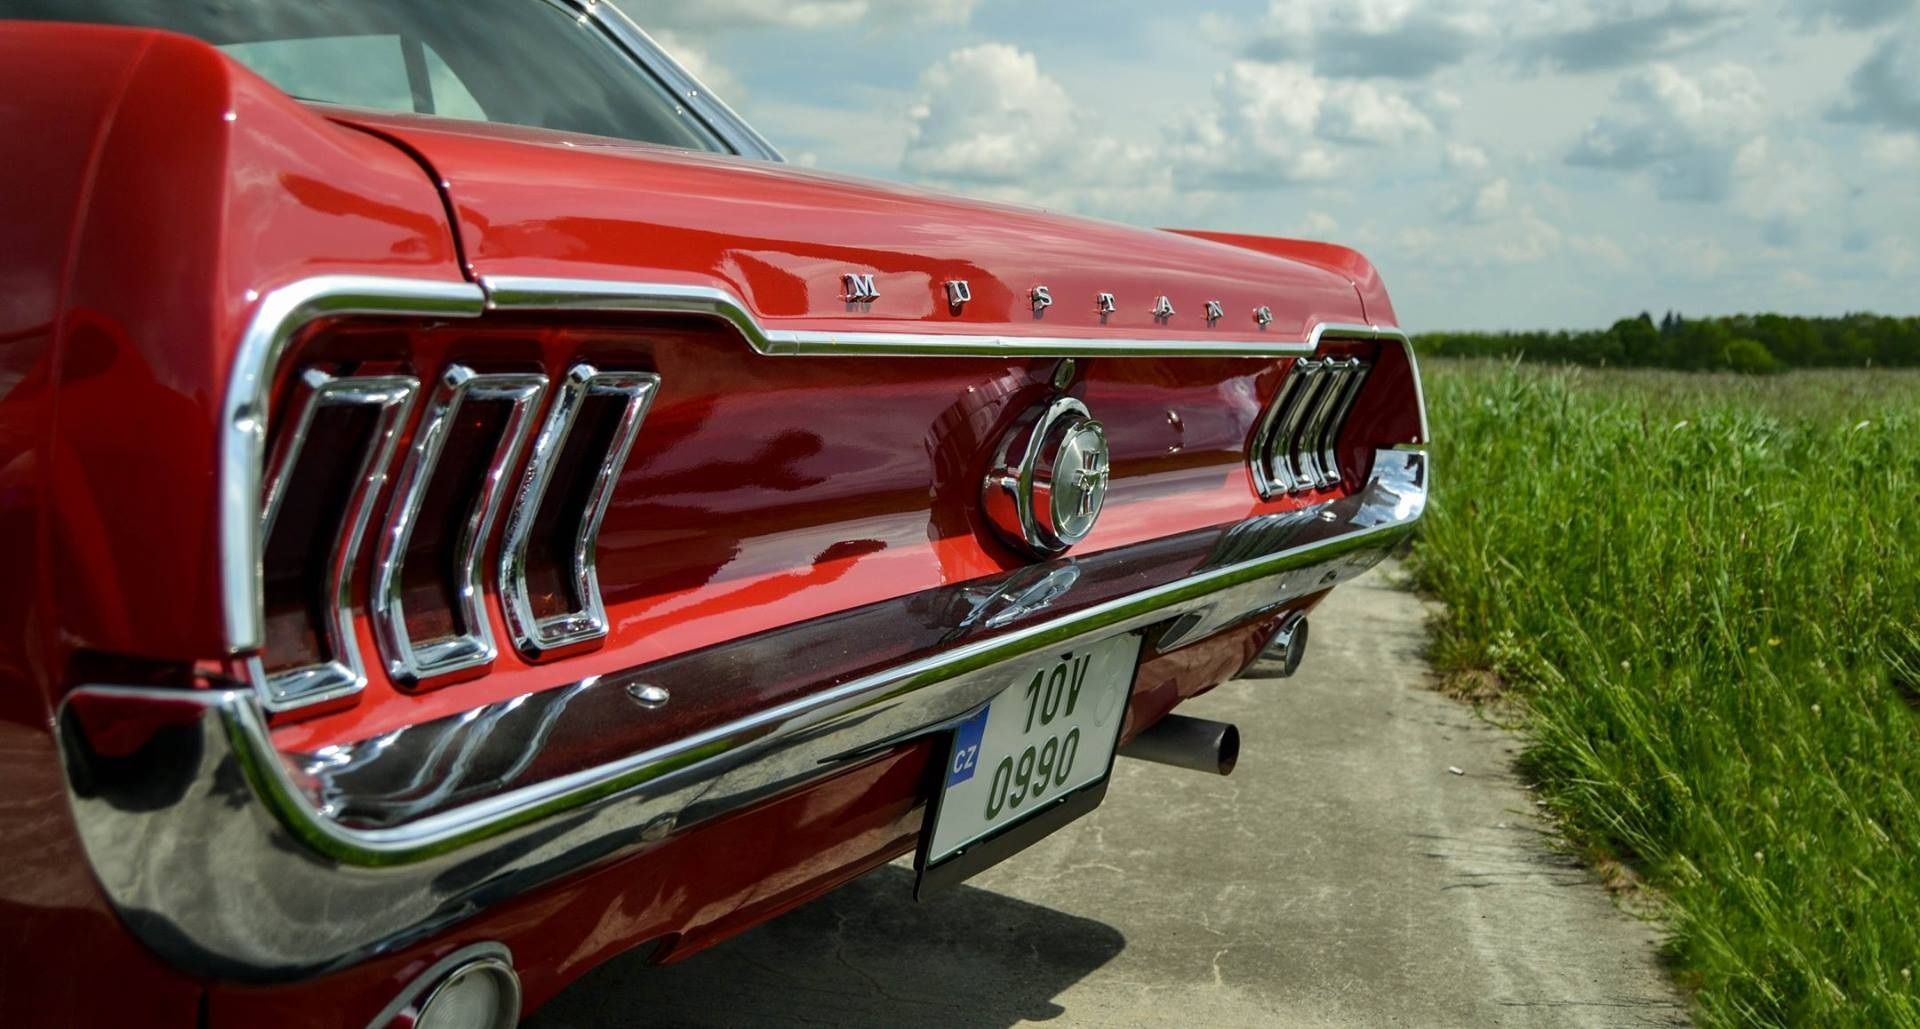 Wallpaper Ford mustang, classic car, rear view